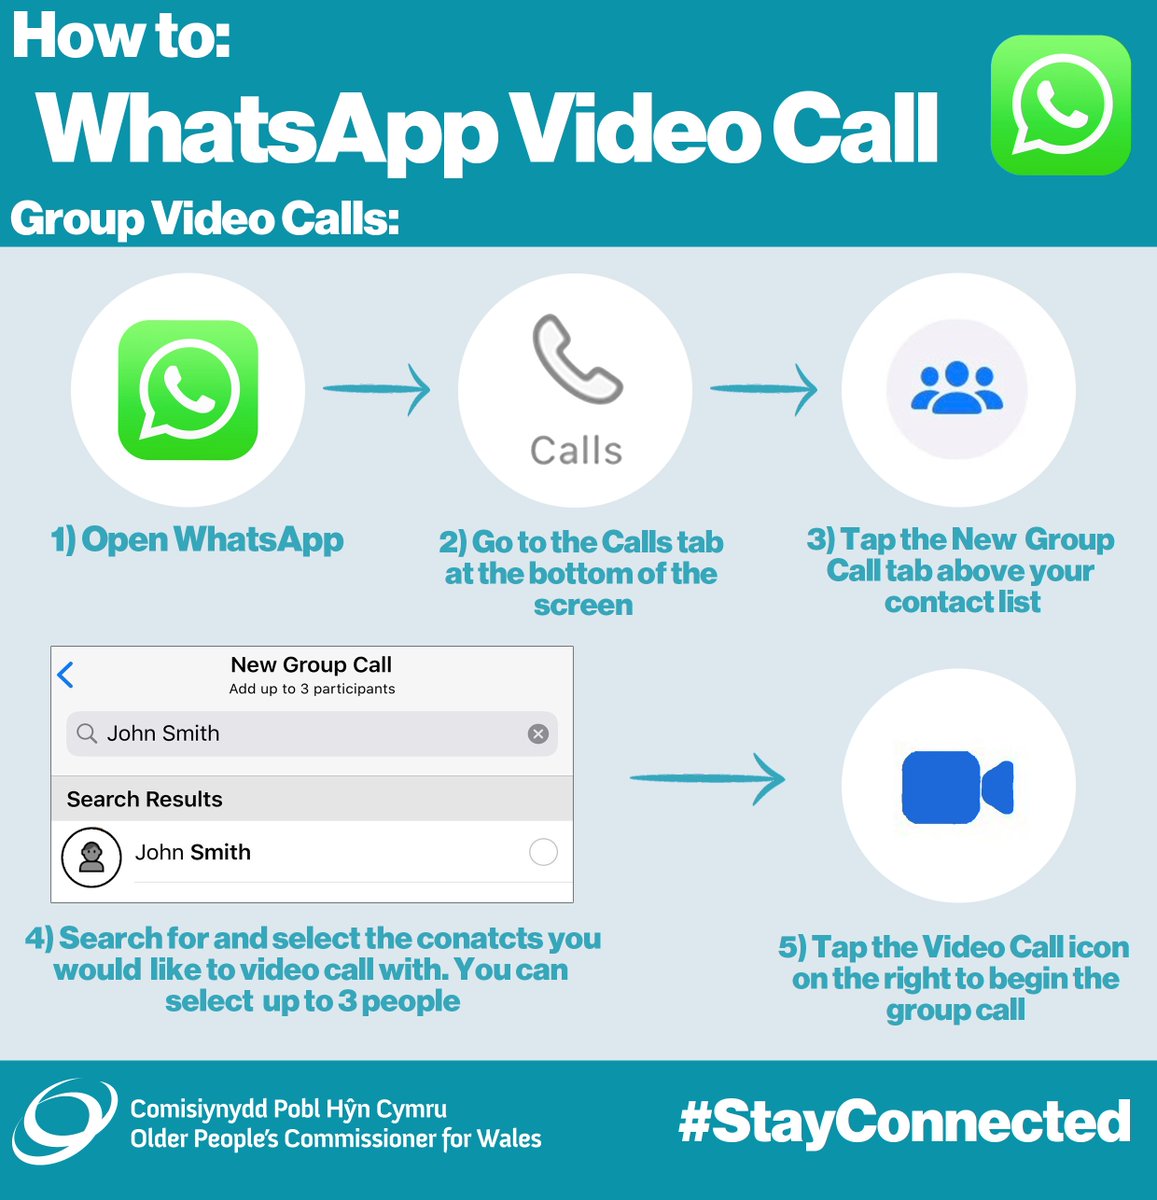 During these difficult times, it’s more important than ever for us to stay connected to our family and friends. To help you  #StayConnected, here’s an easy guide on how to use WhatsApp to video call your loved ones: